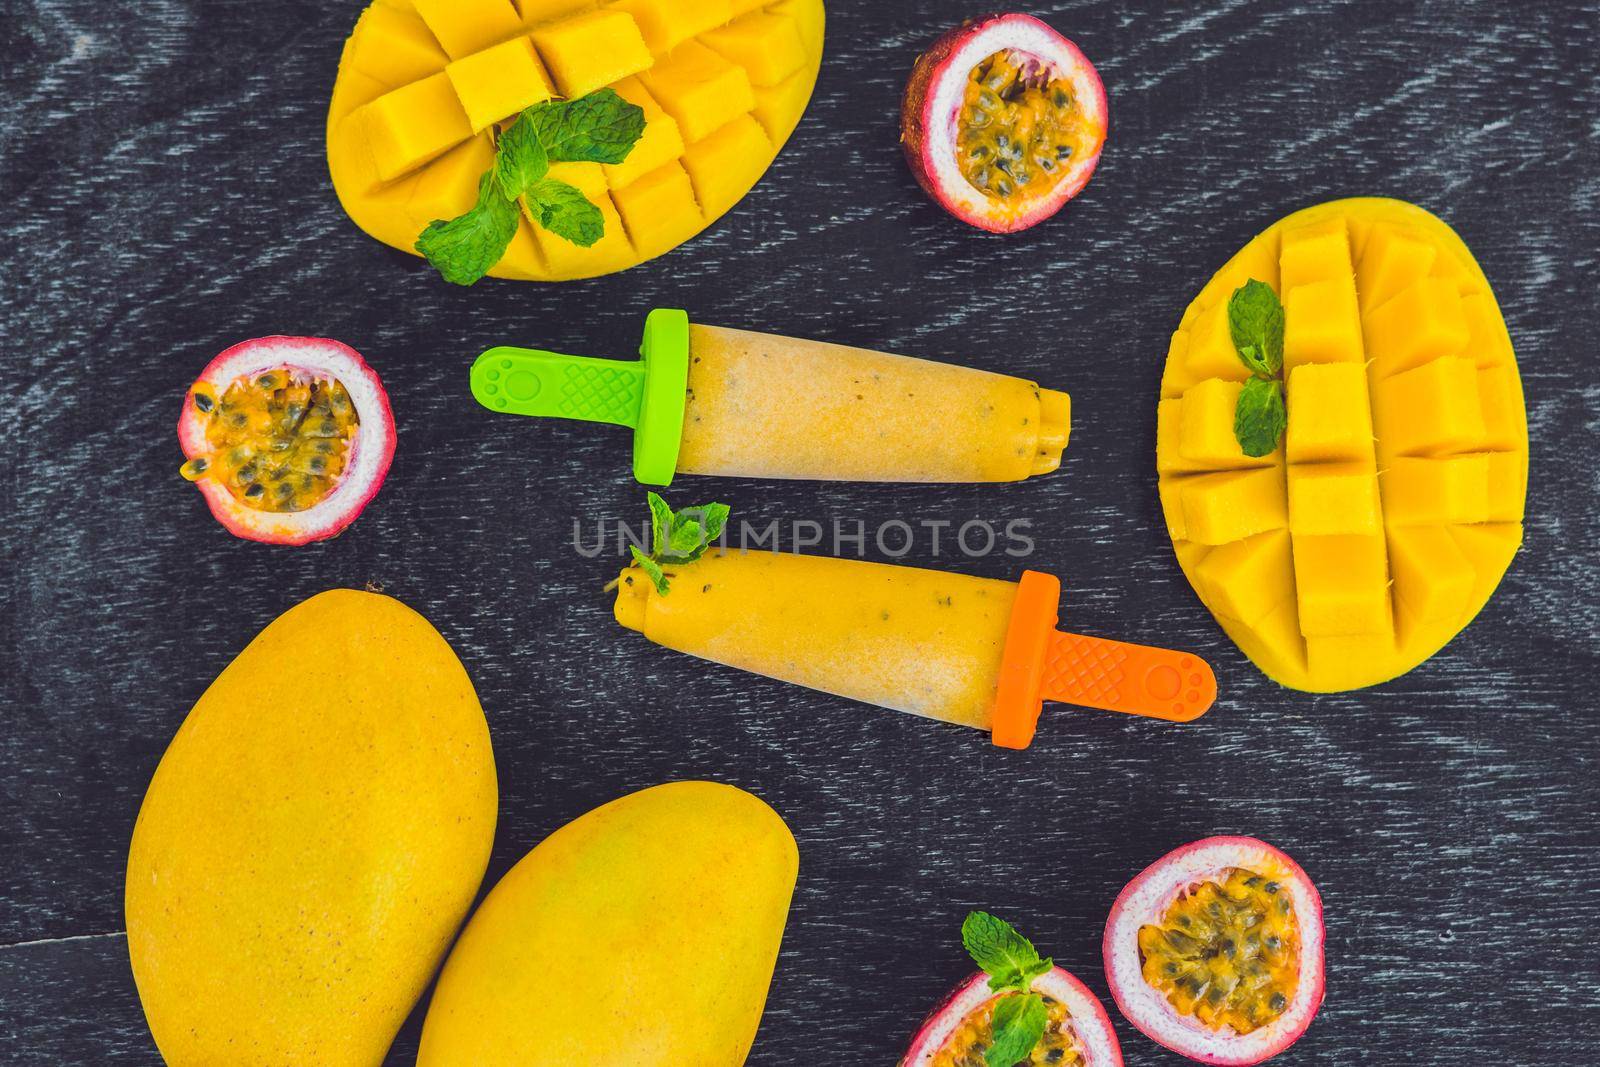 Homemade ice cream from mango and passion fruit. Popsicle by galitskaya